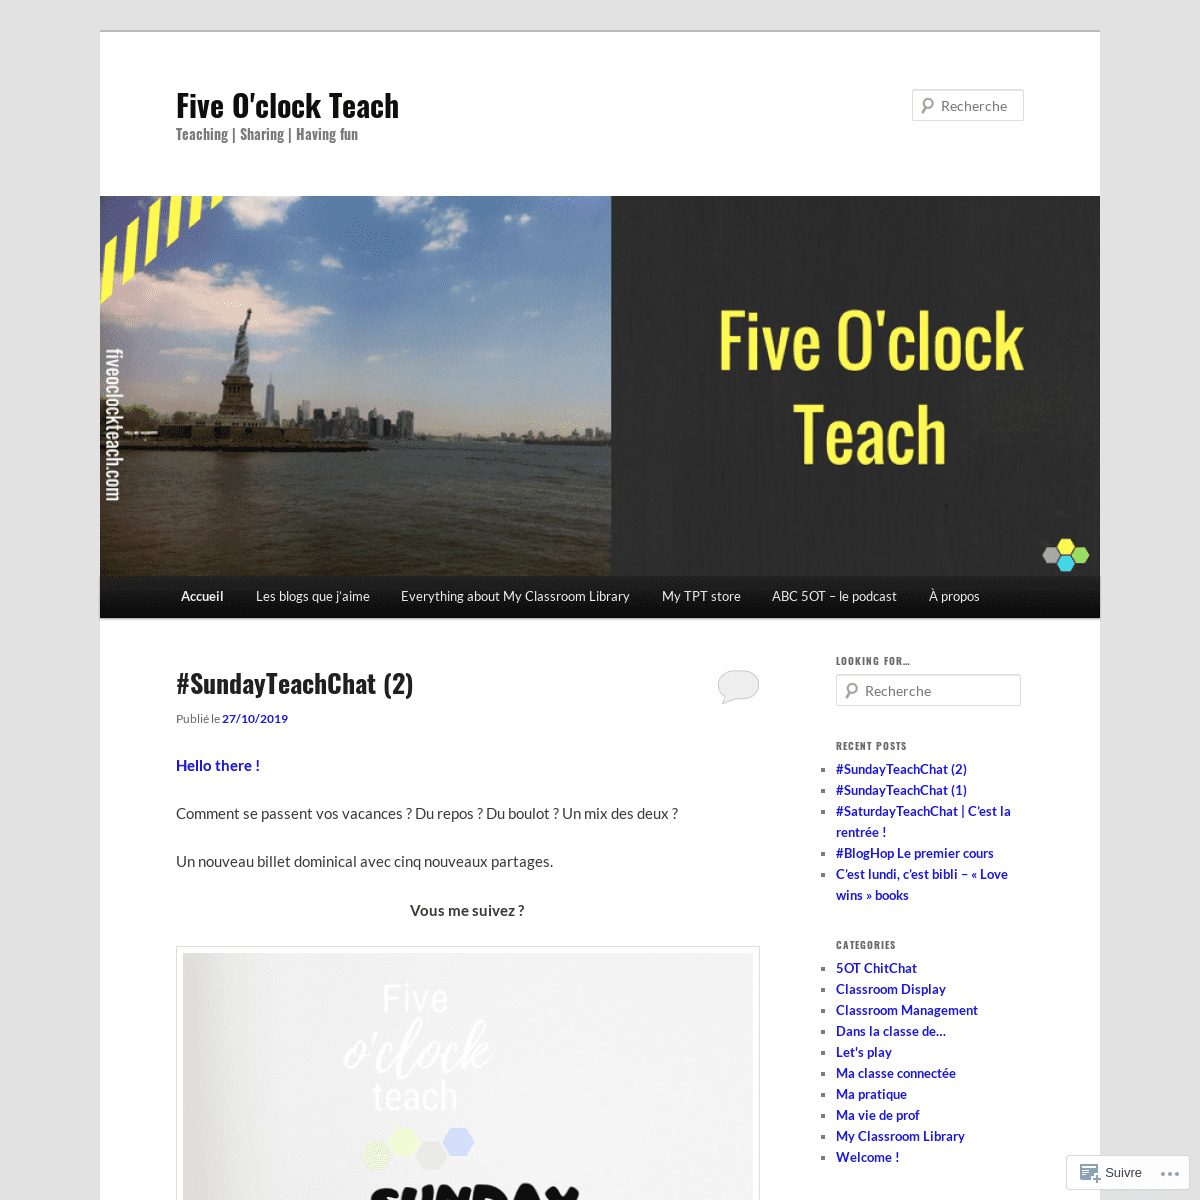 A complete backup of fiveoclockteach.com